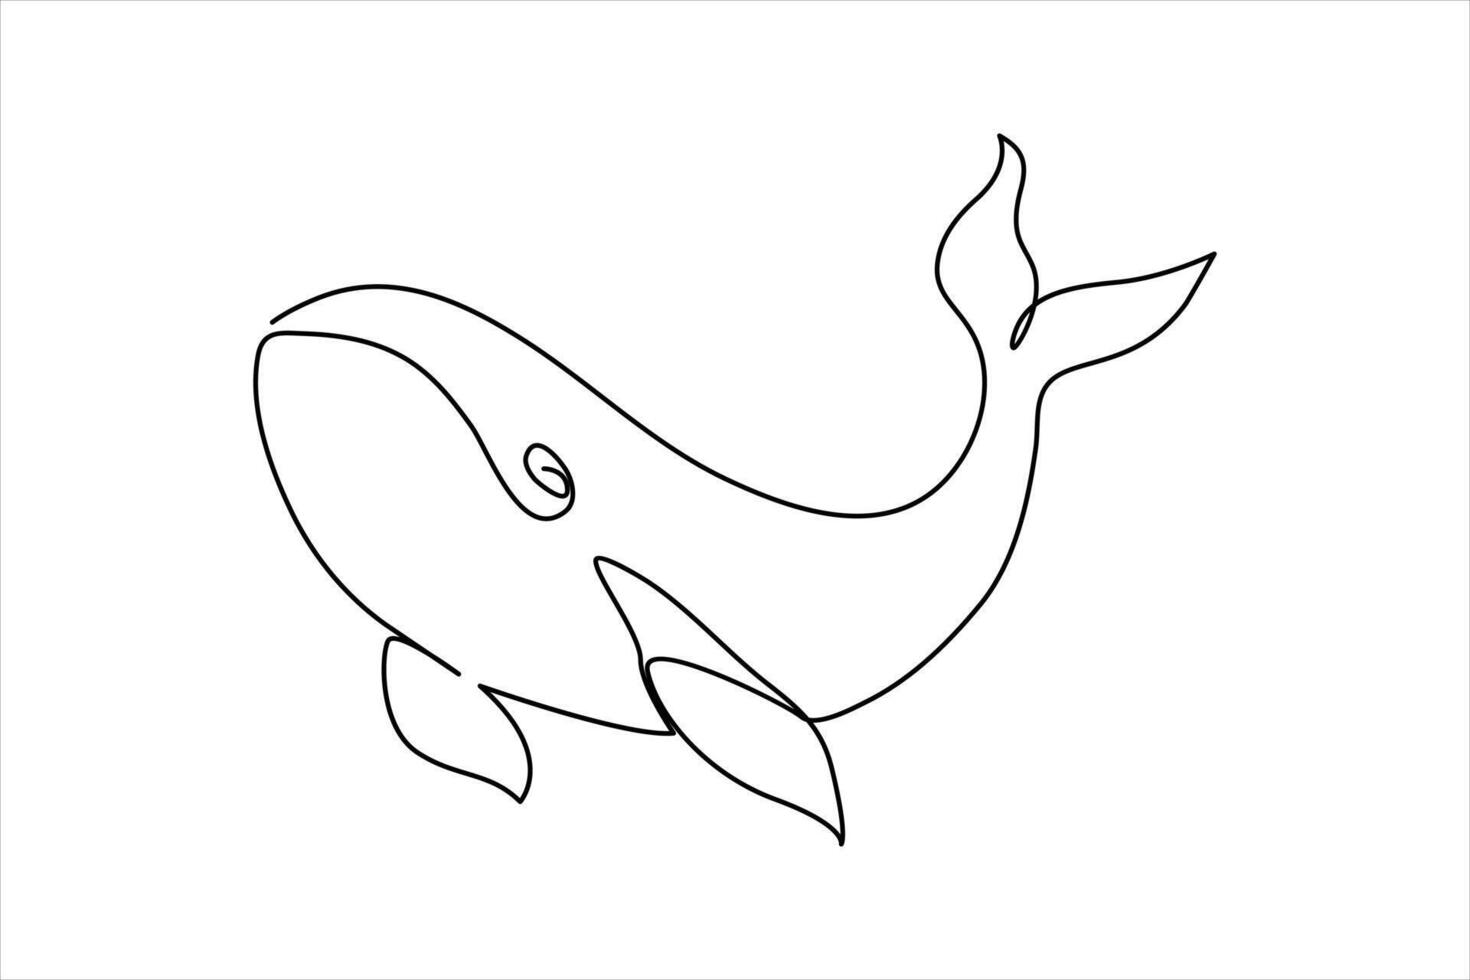 Continuous One line whale outline vector art illustration